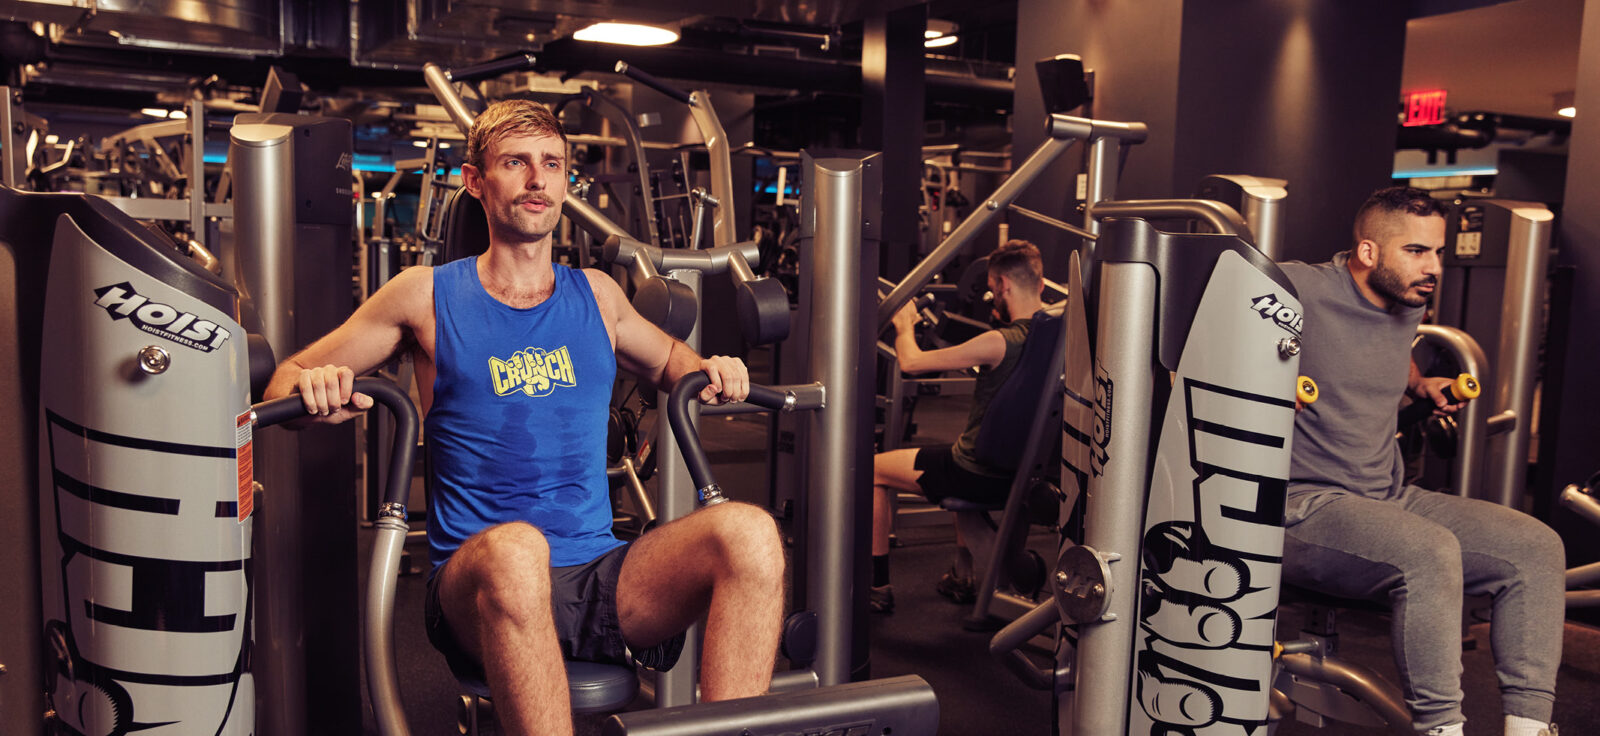 The 4 Best Luxury Fitness Clubs and Premium Gym Memberships for